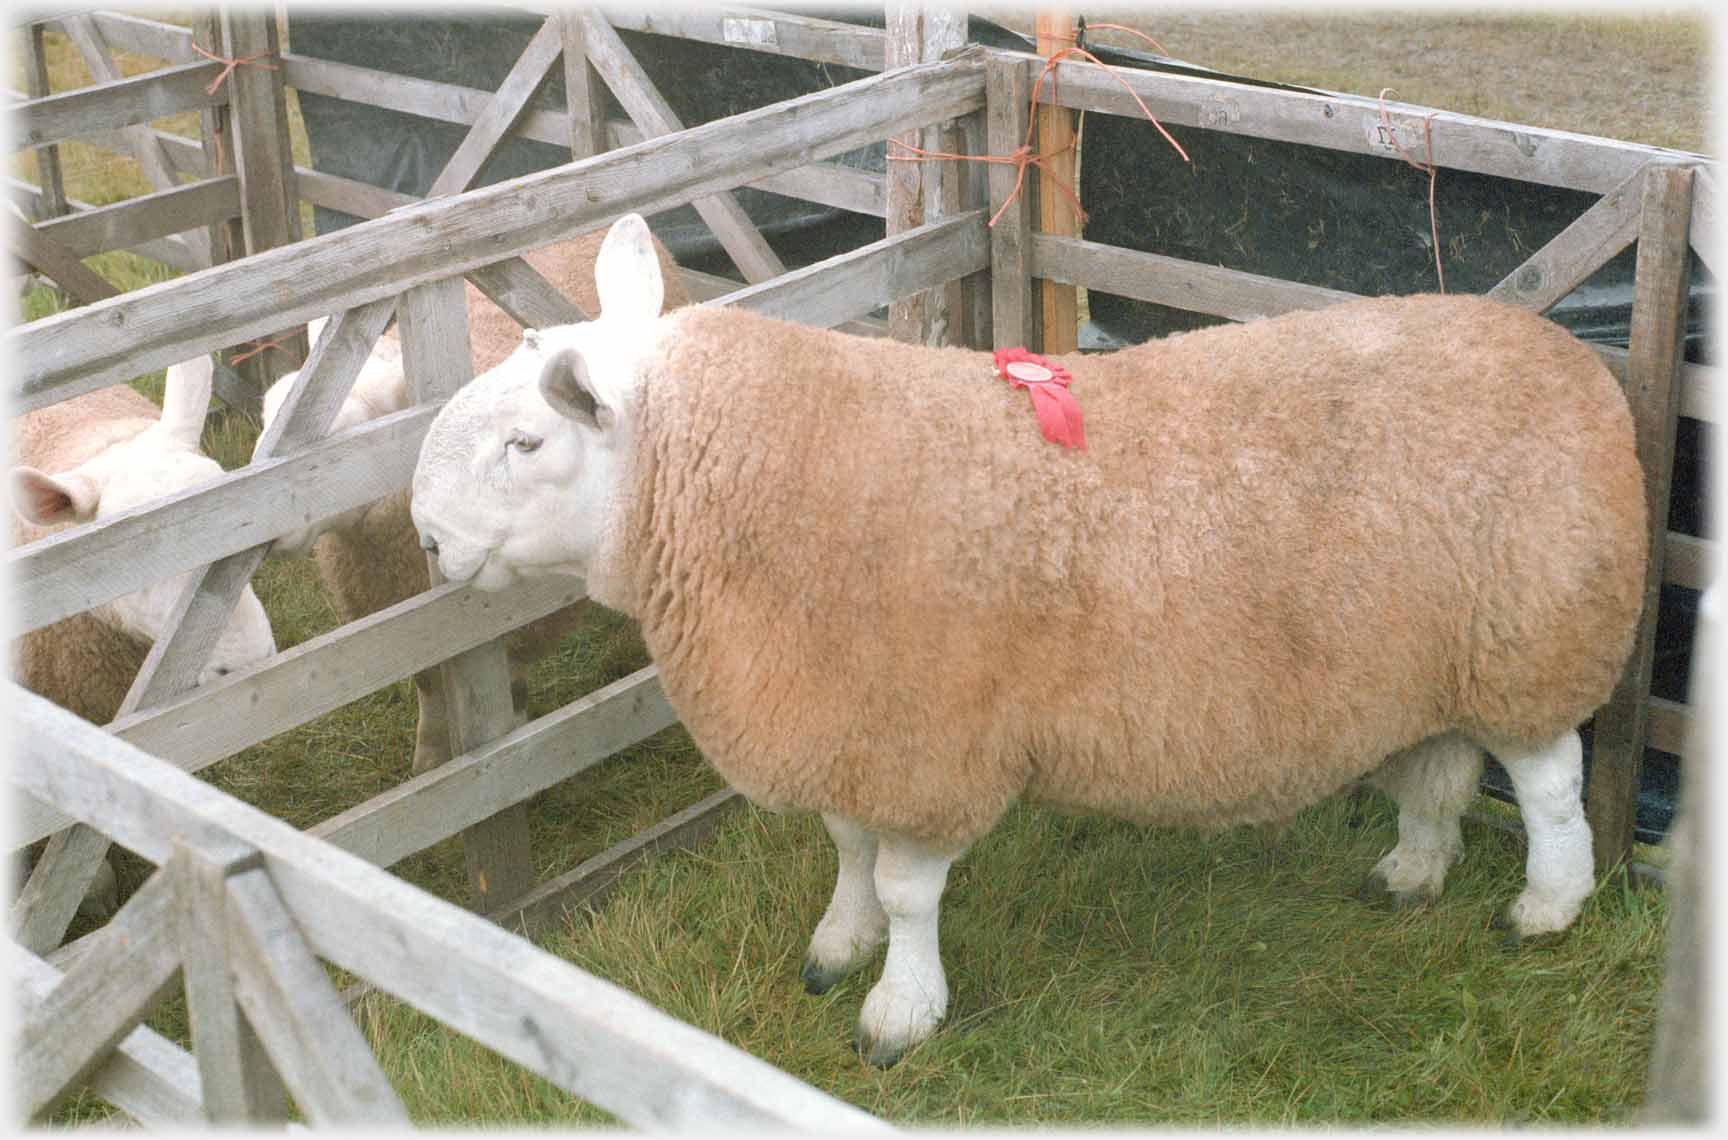 Perfectly groomed sheep with rosette.